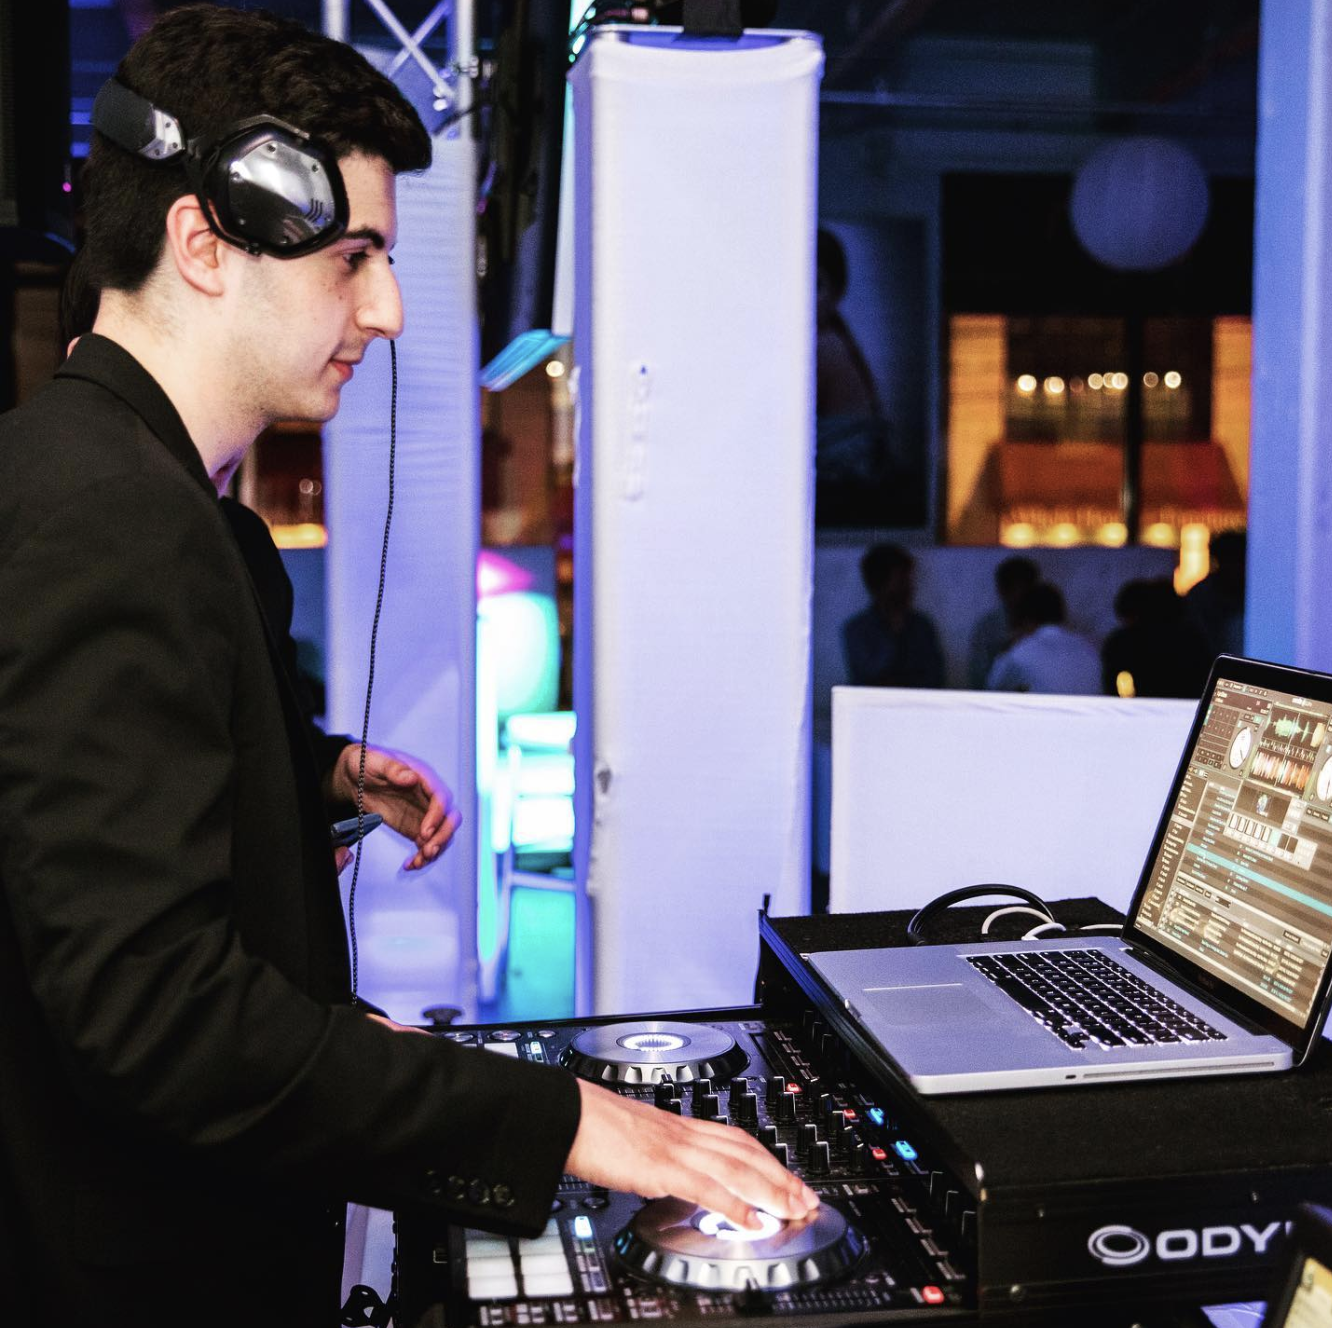 Philly wedding DJ Ethan Mazer performing live for a reception.